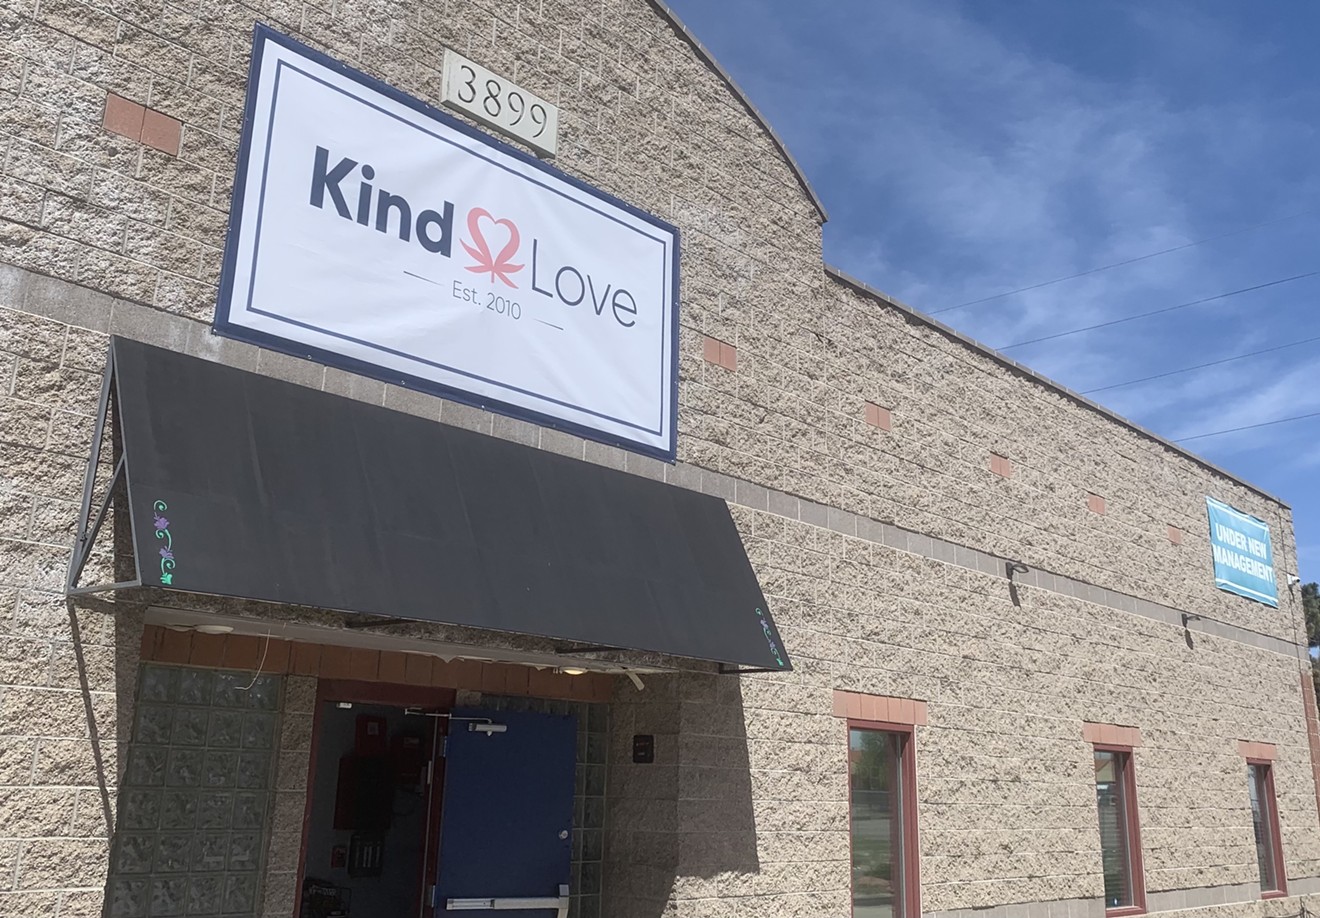 Kind Love's new Denver dispensary at 3899 Quentin Street is just the tip of the iceberg, according to the Spitz family.